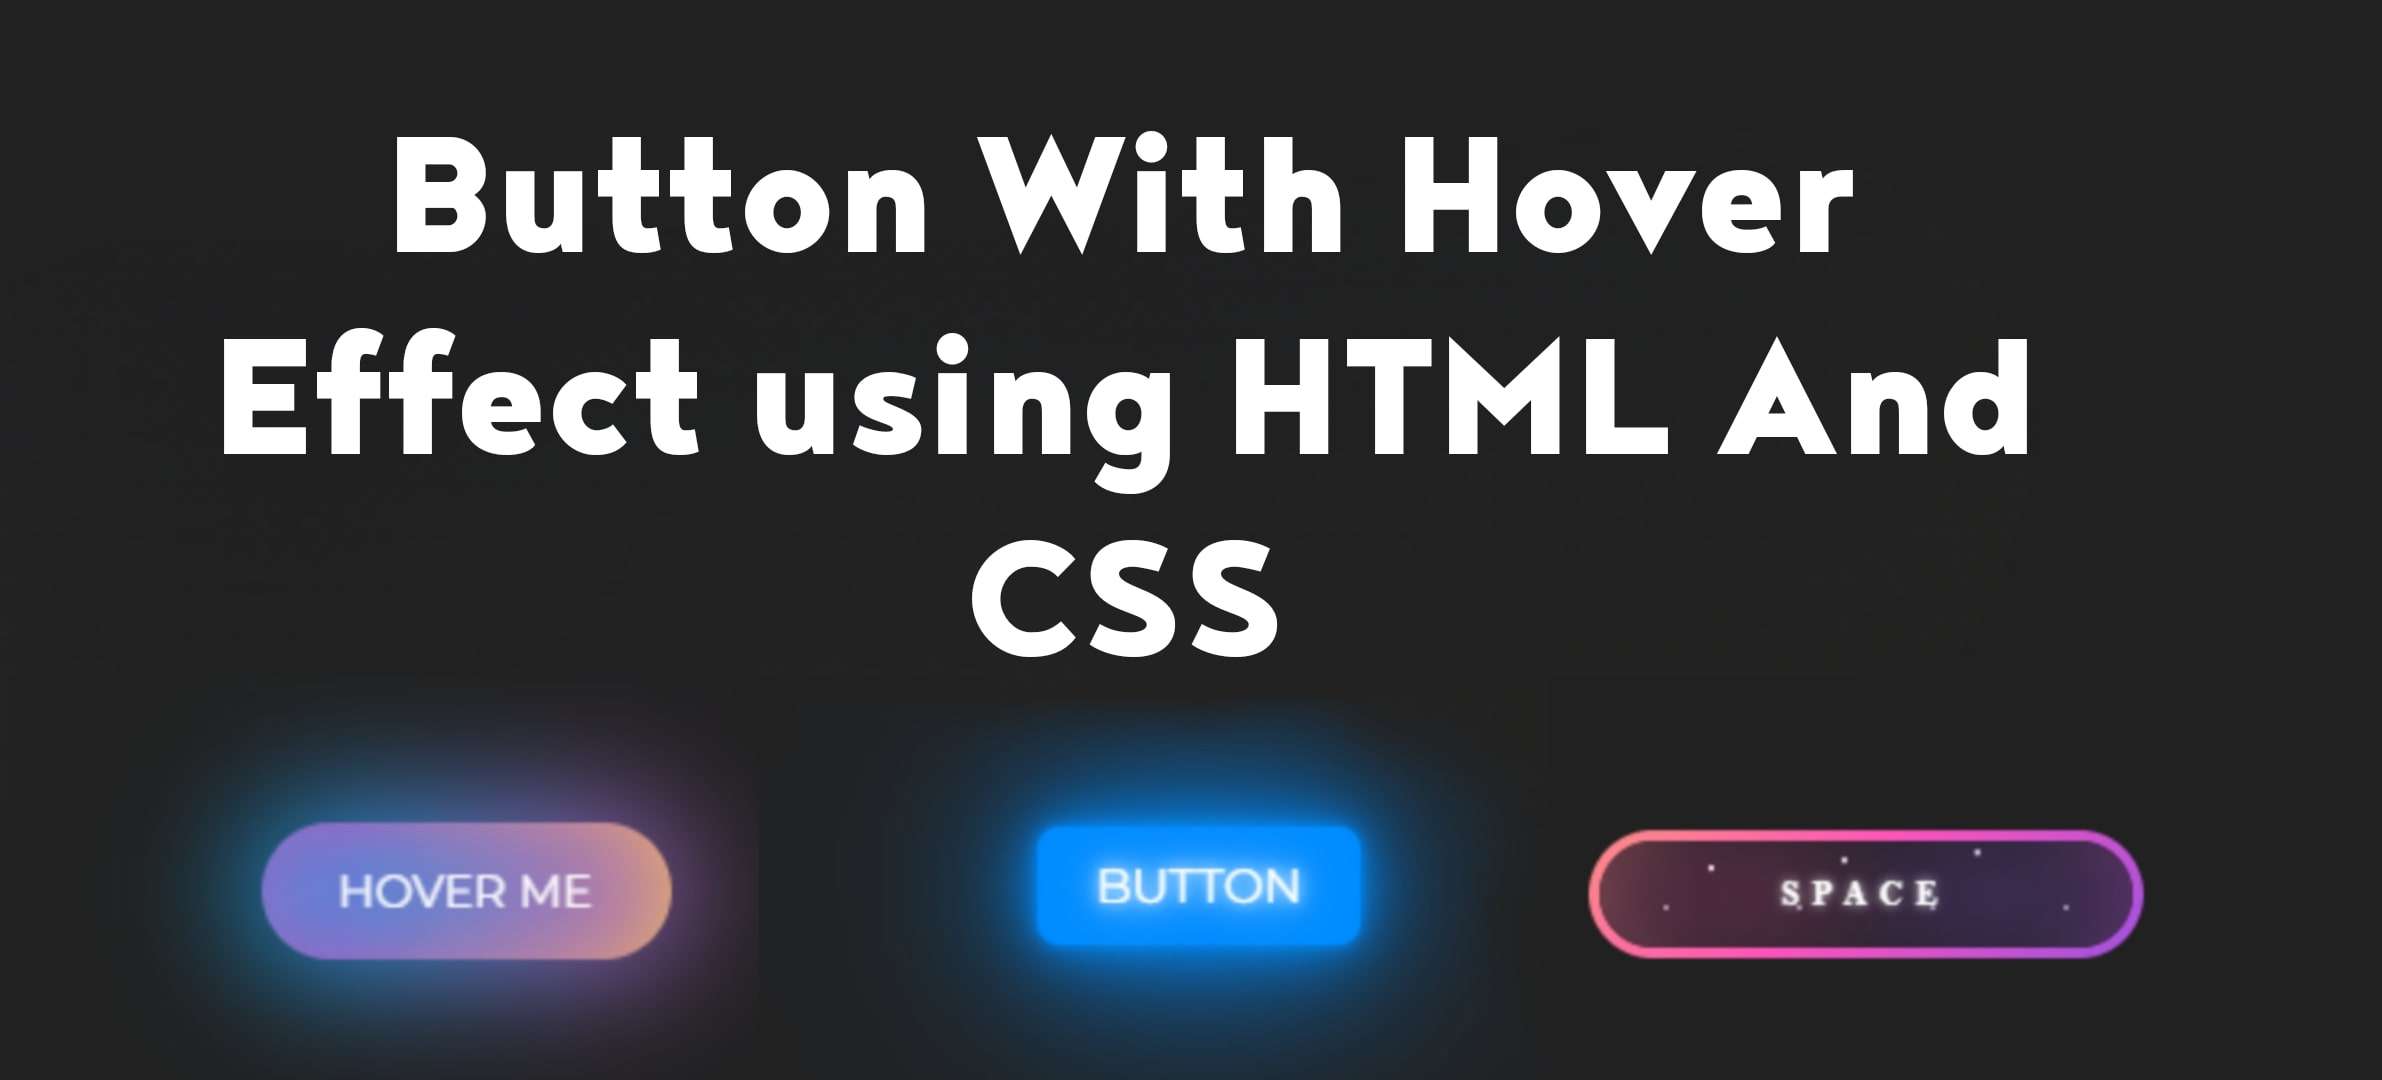 How To Create Button With Hovers Effect Using HTML And CSS | 3 Hover Buttons using HTML And CSS